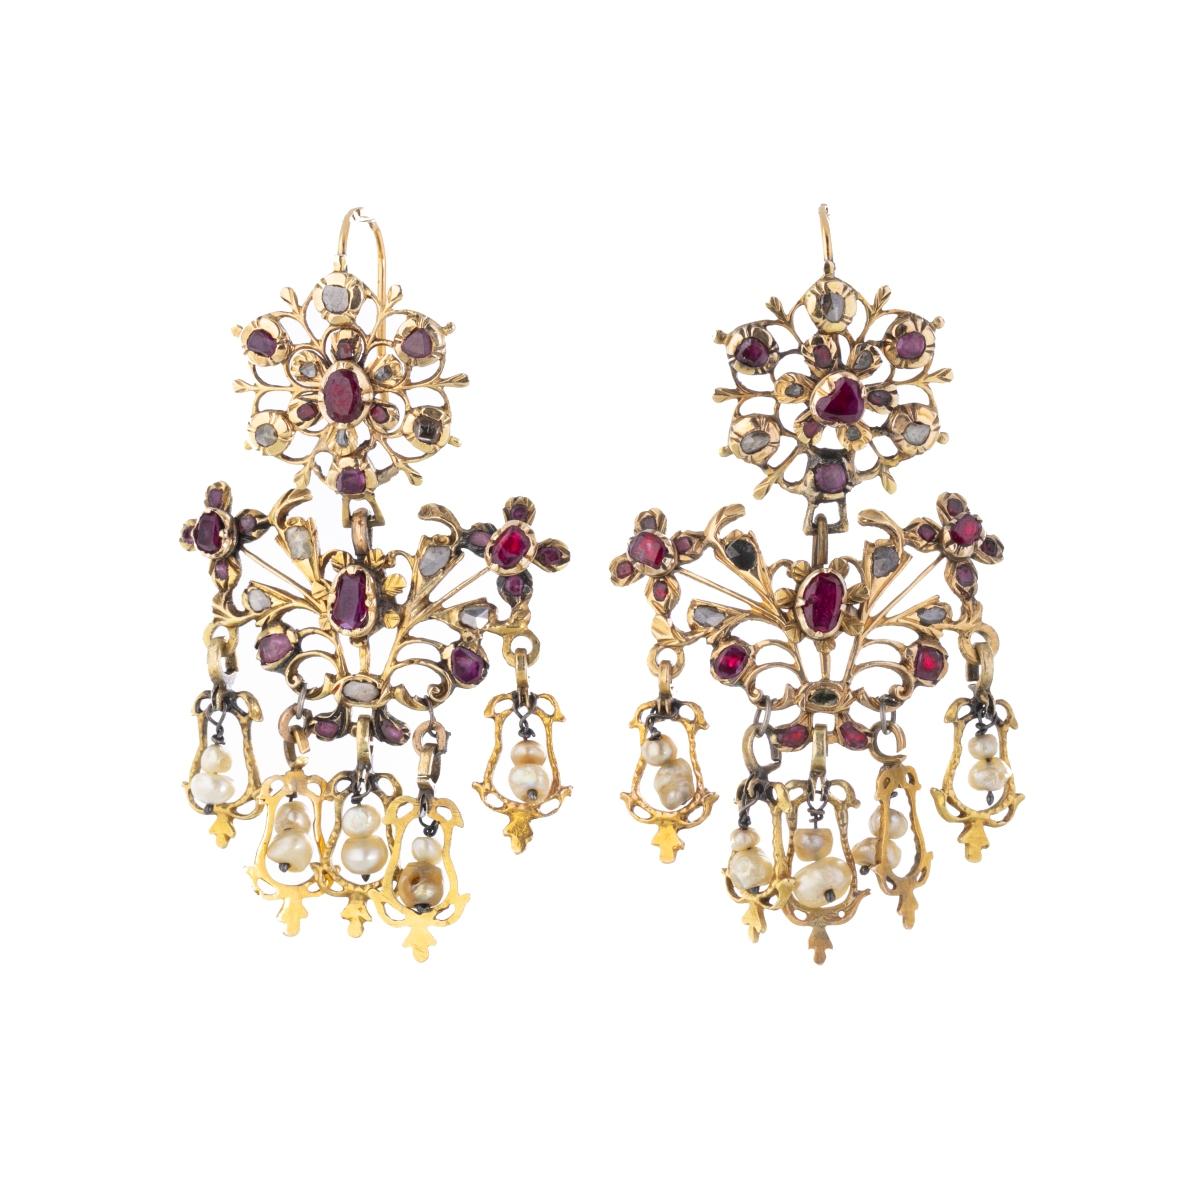 Pair of French 18th century gold earrings
in fenestrated gold earring with pendant elements, studded with rubies, diamonds and jellyfish. Remarked with French warranty marks 'ET', post 1838'. Signs of use, restorations and earring hooks open, put